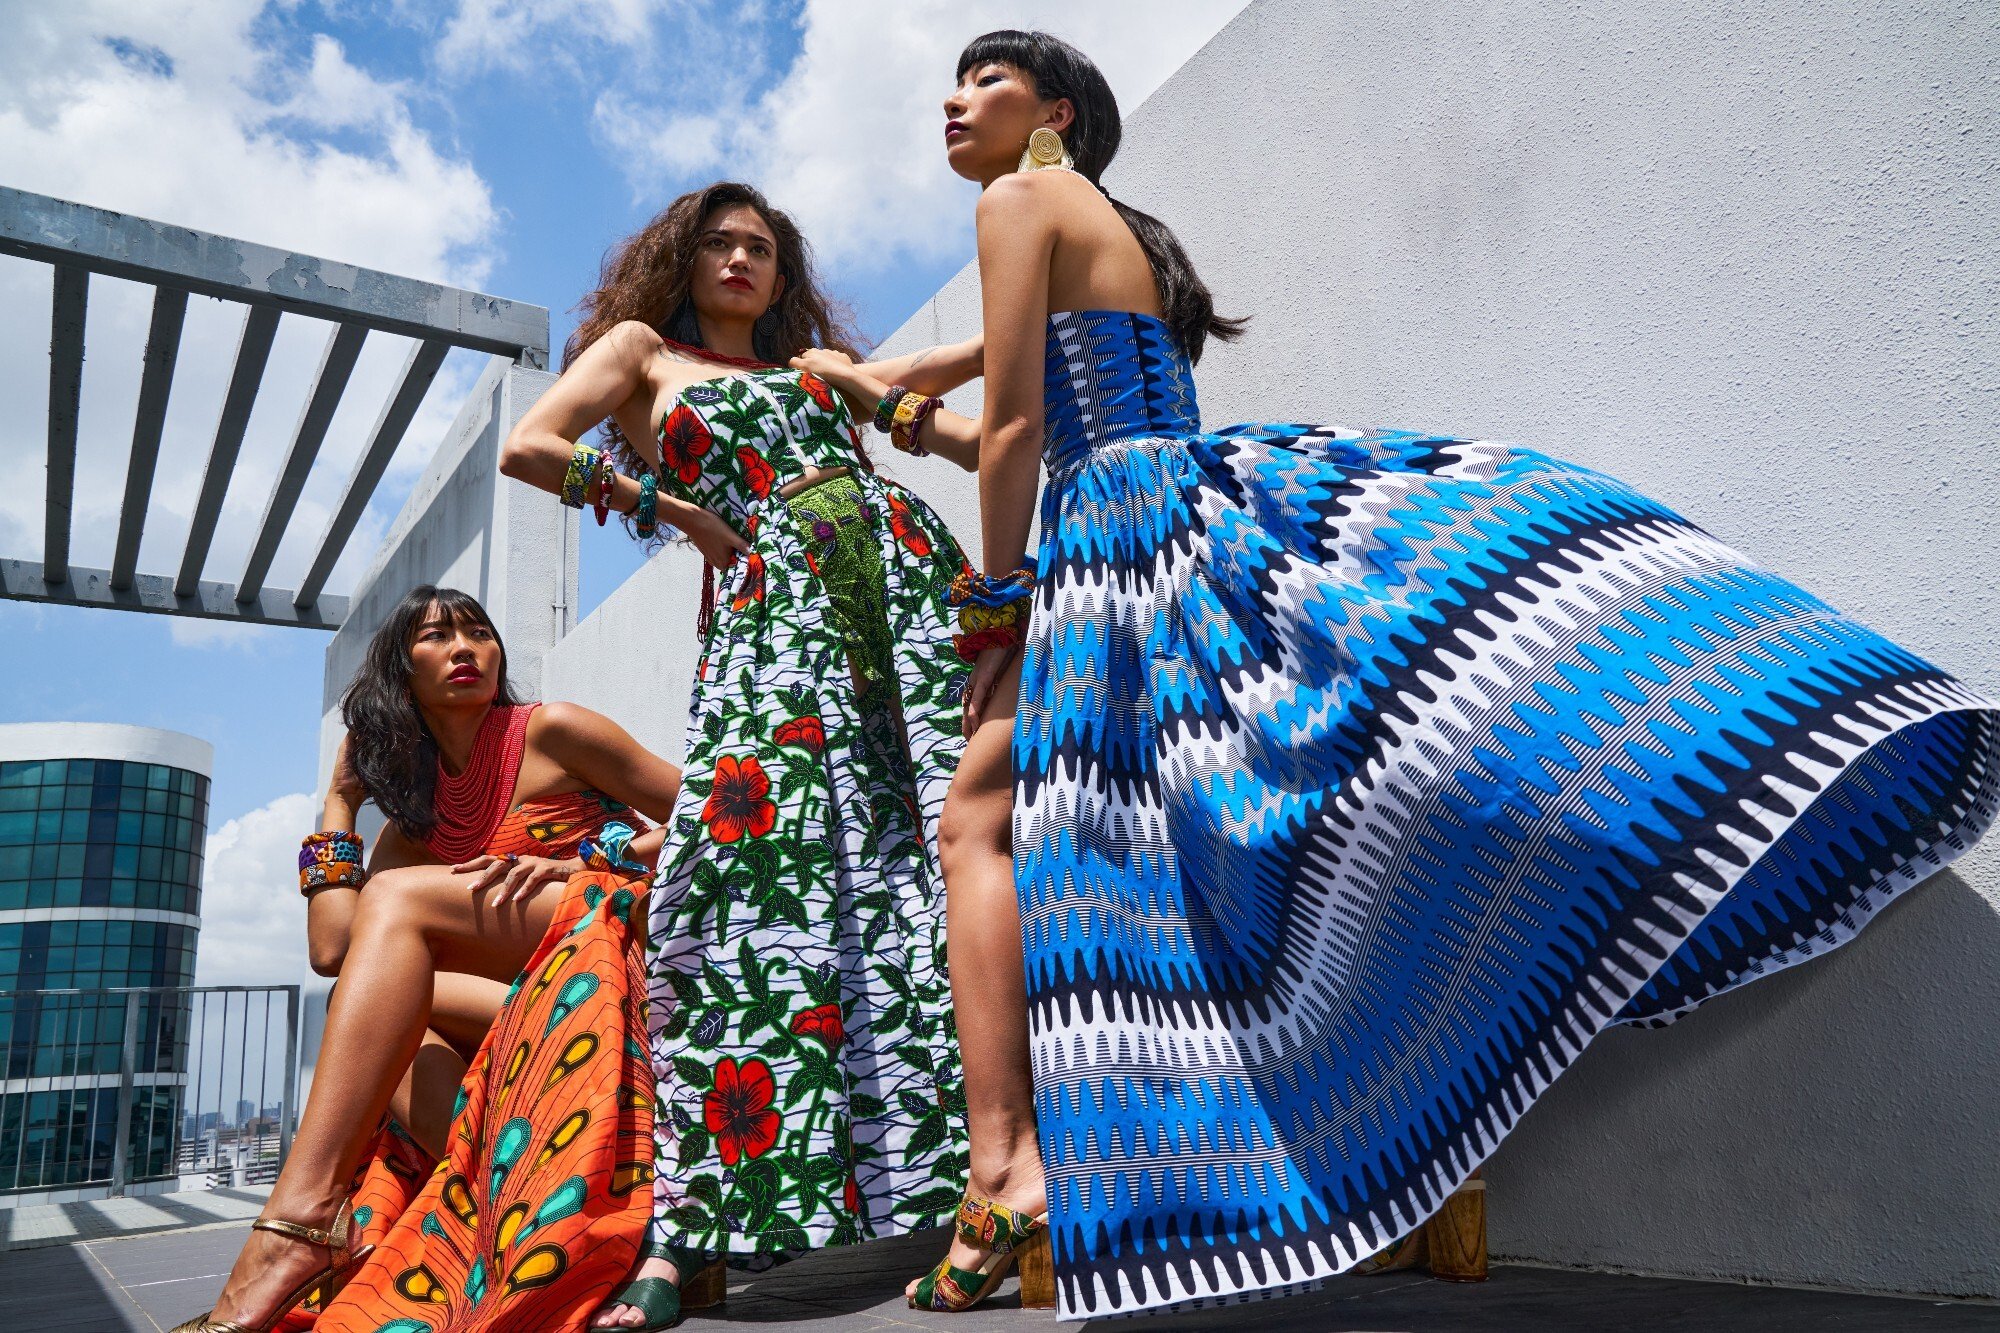 Singaporean slow fashion brand OliveAnkara is one example of the city’s move towards supporting more sustainability in fashion. Photo: OliveAnkara